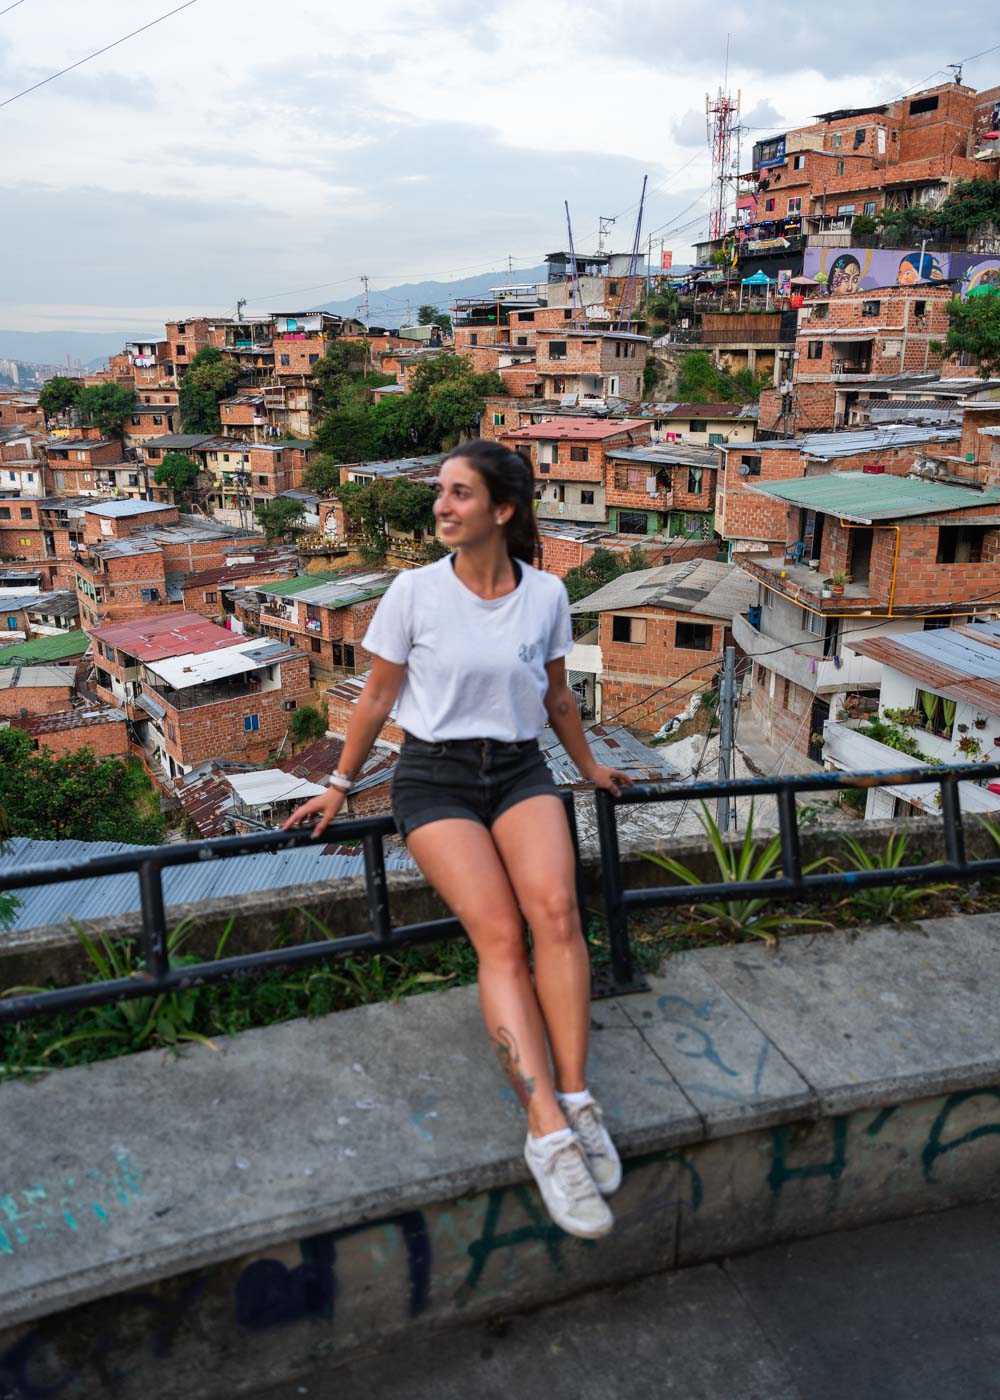 Sara sitting on a railing with a backdrop of the brick houses built on the hill of Comuna 13.